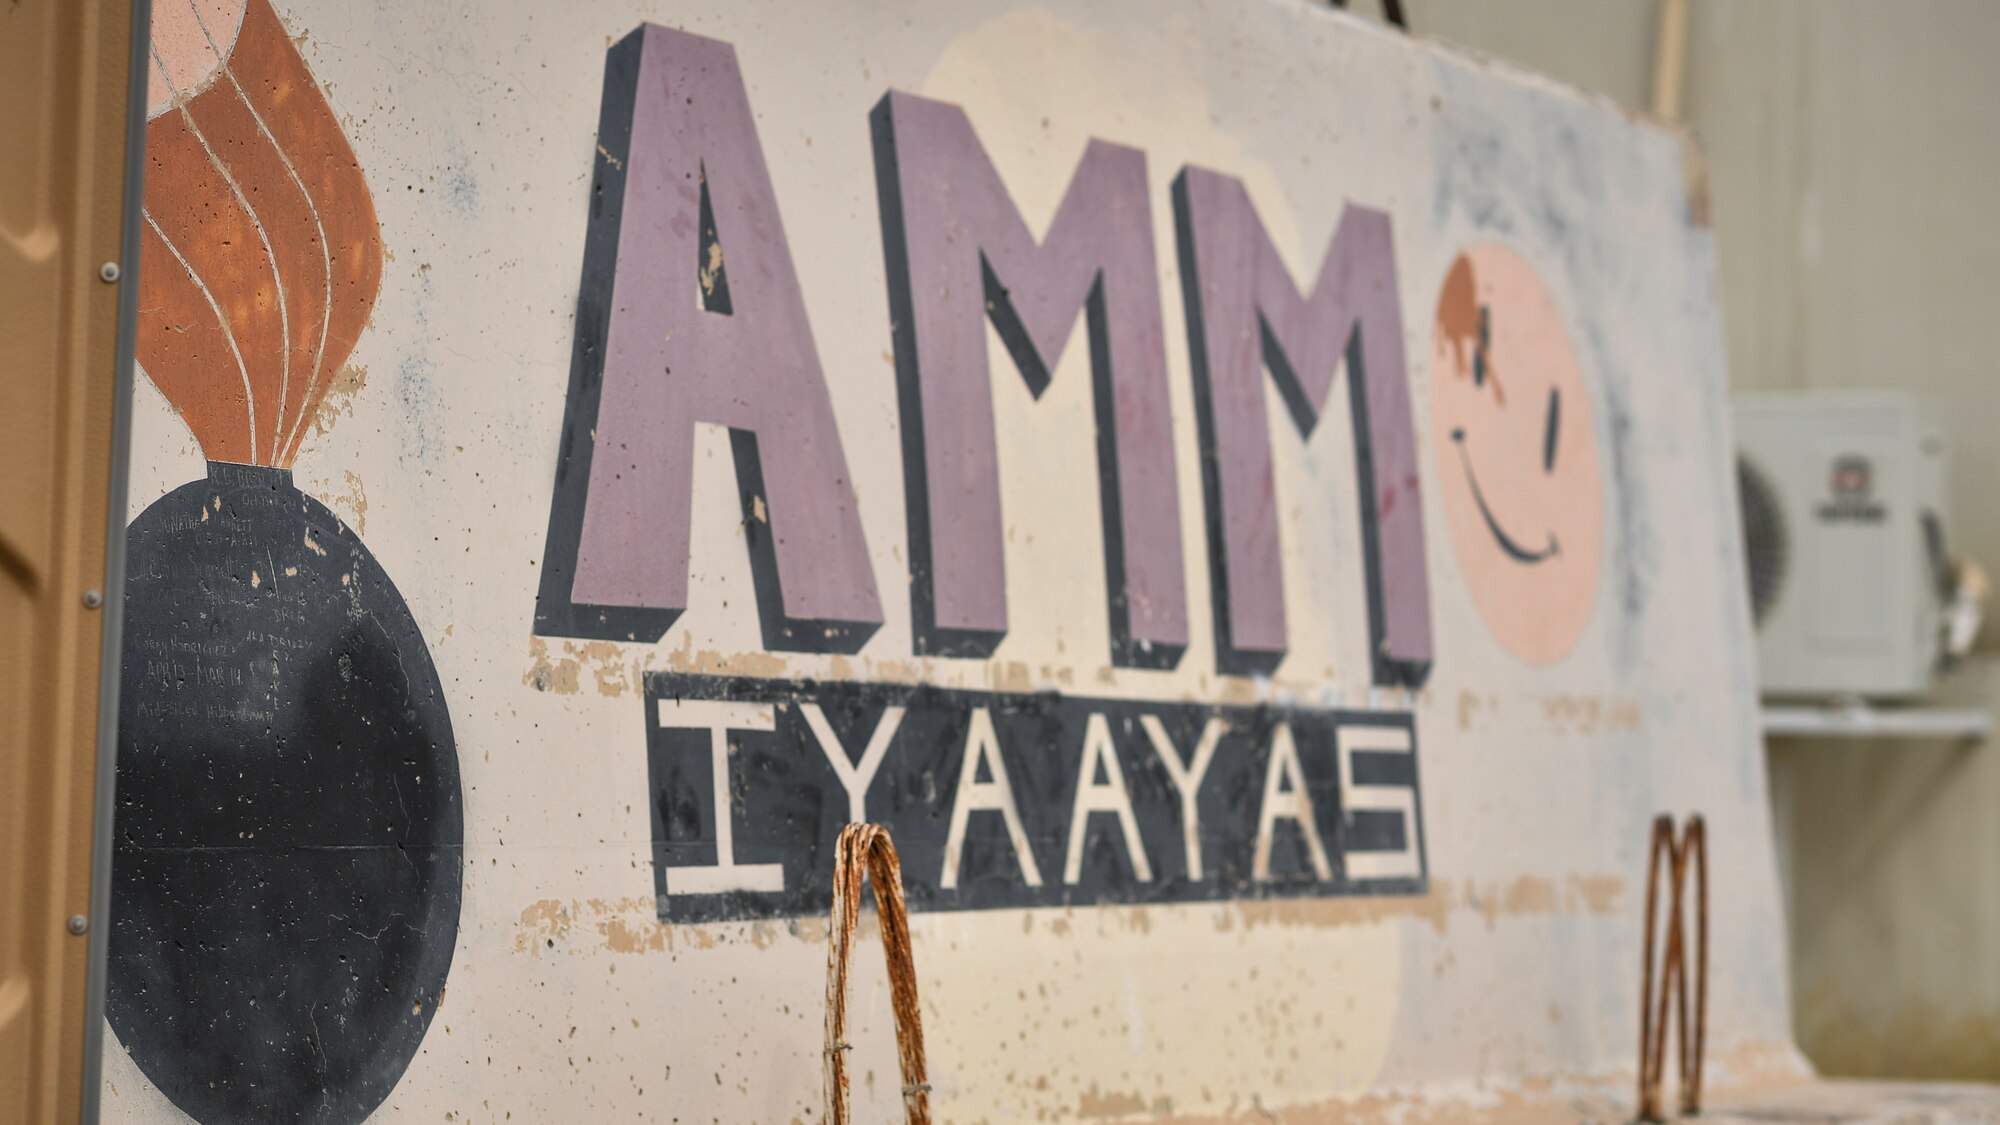 An ammunitions sign marks the entrance of the munitions storage area at Ali Al Salem Air Base, Kuwait, July 18, 2019. Ammunition Airmen from the 386th Expeditionary Maintenance Squadron are responsible for the munitions stockpile. Various duties include shipping and receiving, building, testing, operating, protecting, inspecting, storing and performing maintenance on all types of conventional munition systems. (U.S. Air Force photo by Staff. Sgt. Mozer O. Da Cunha)